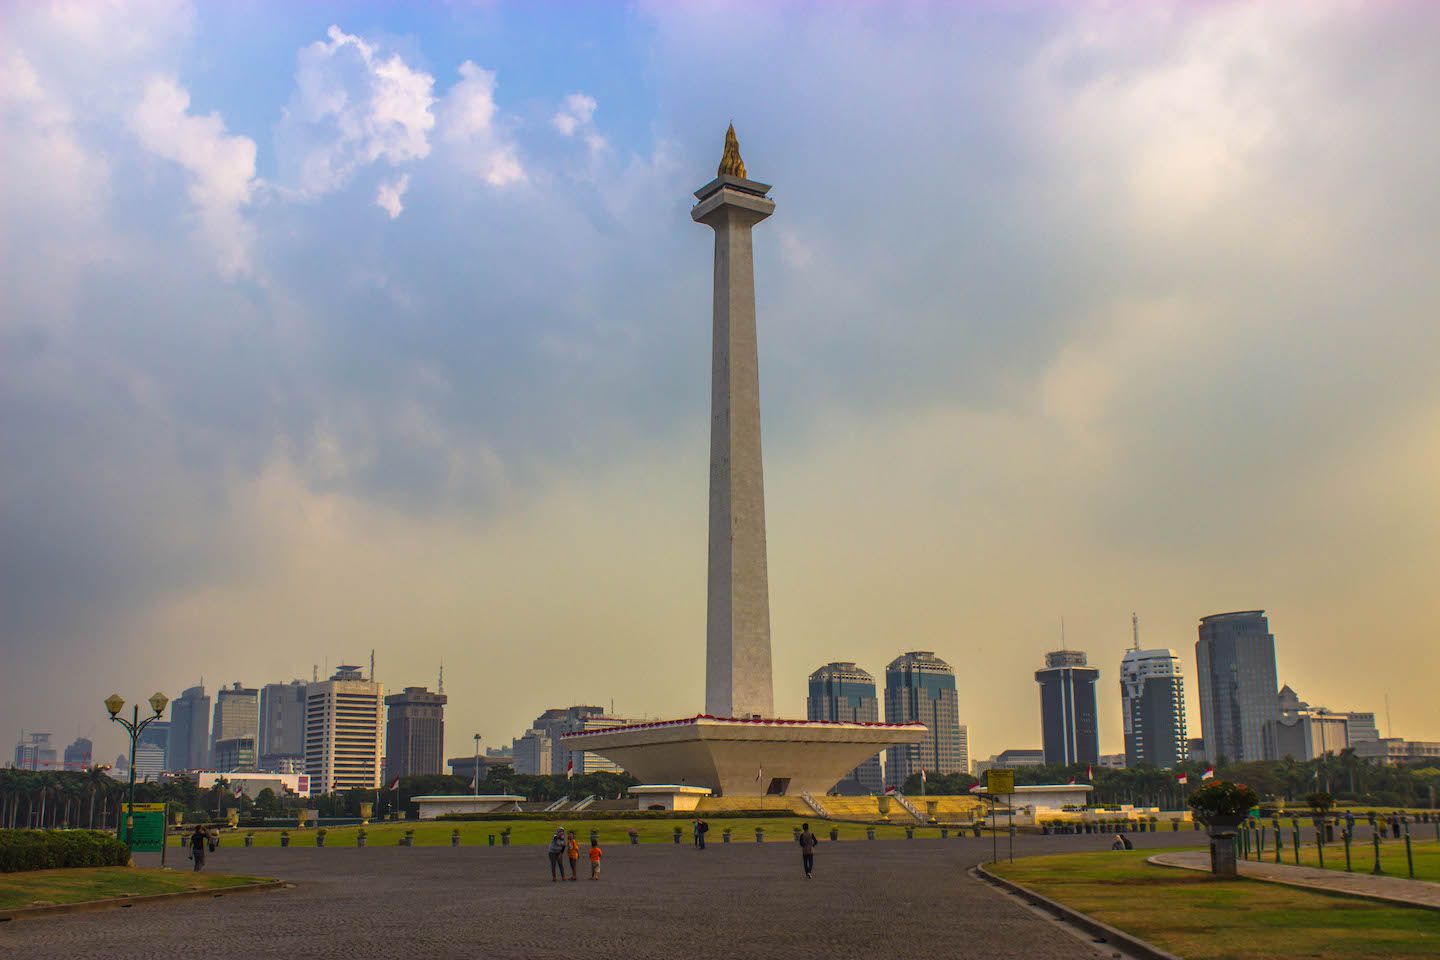 View of the National Monument in Jakarta, Indonesia